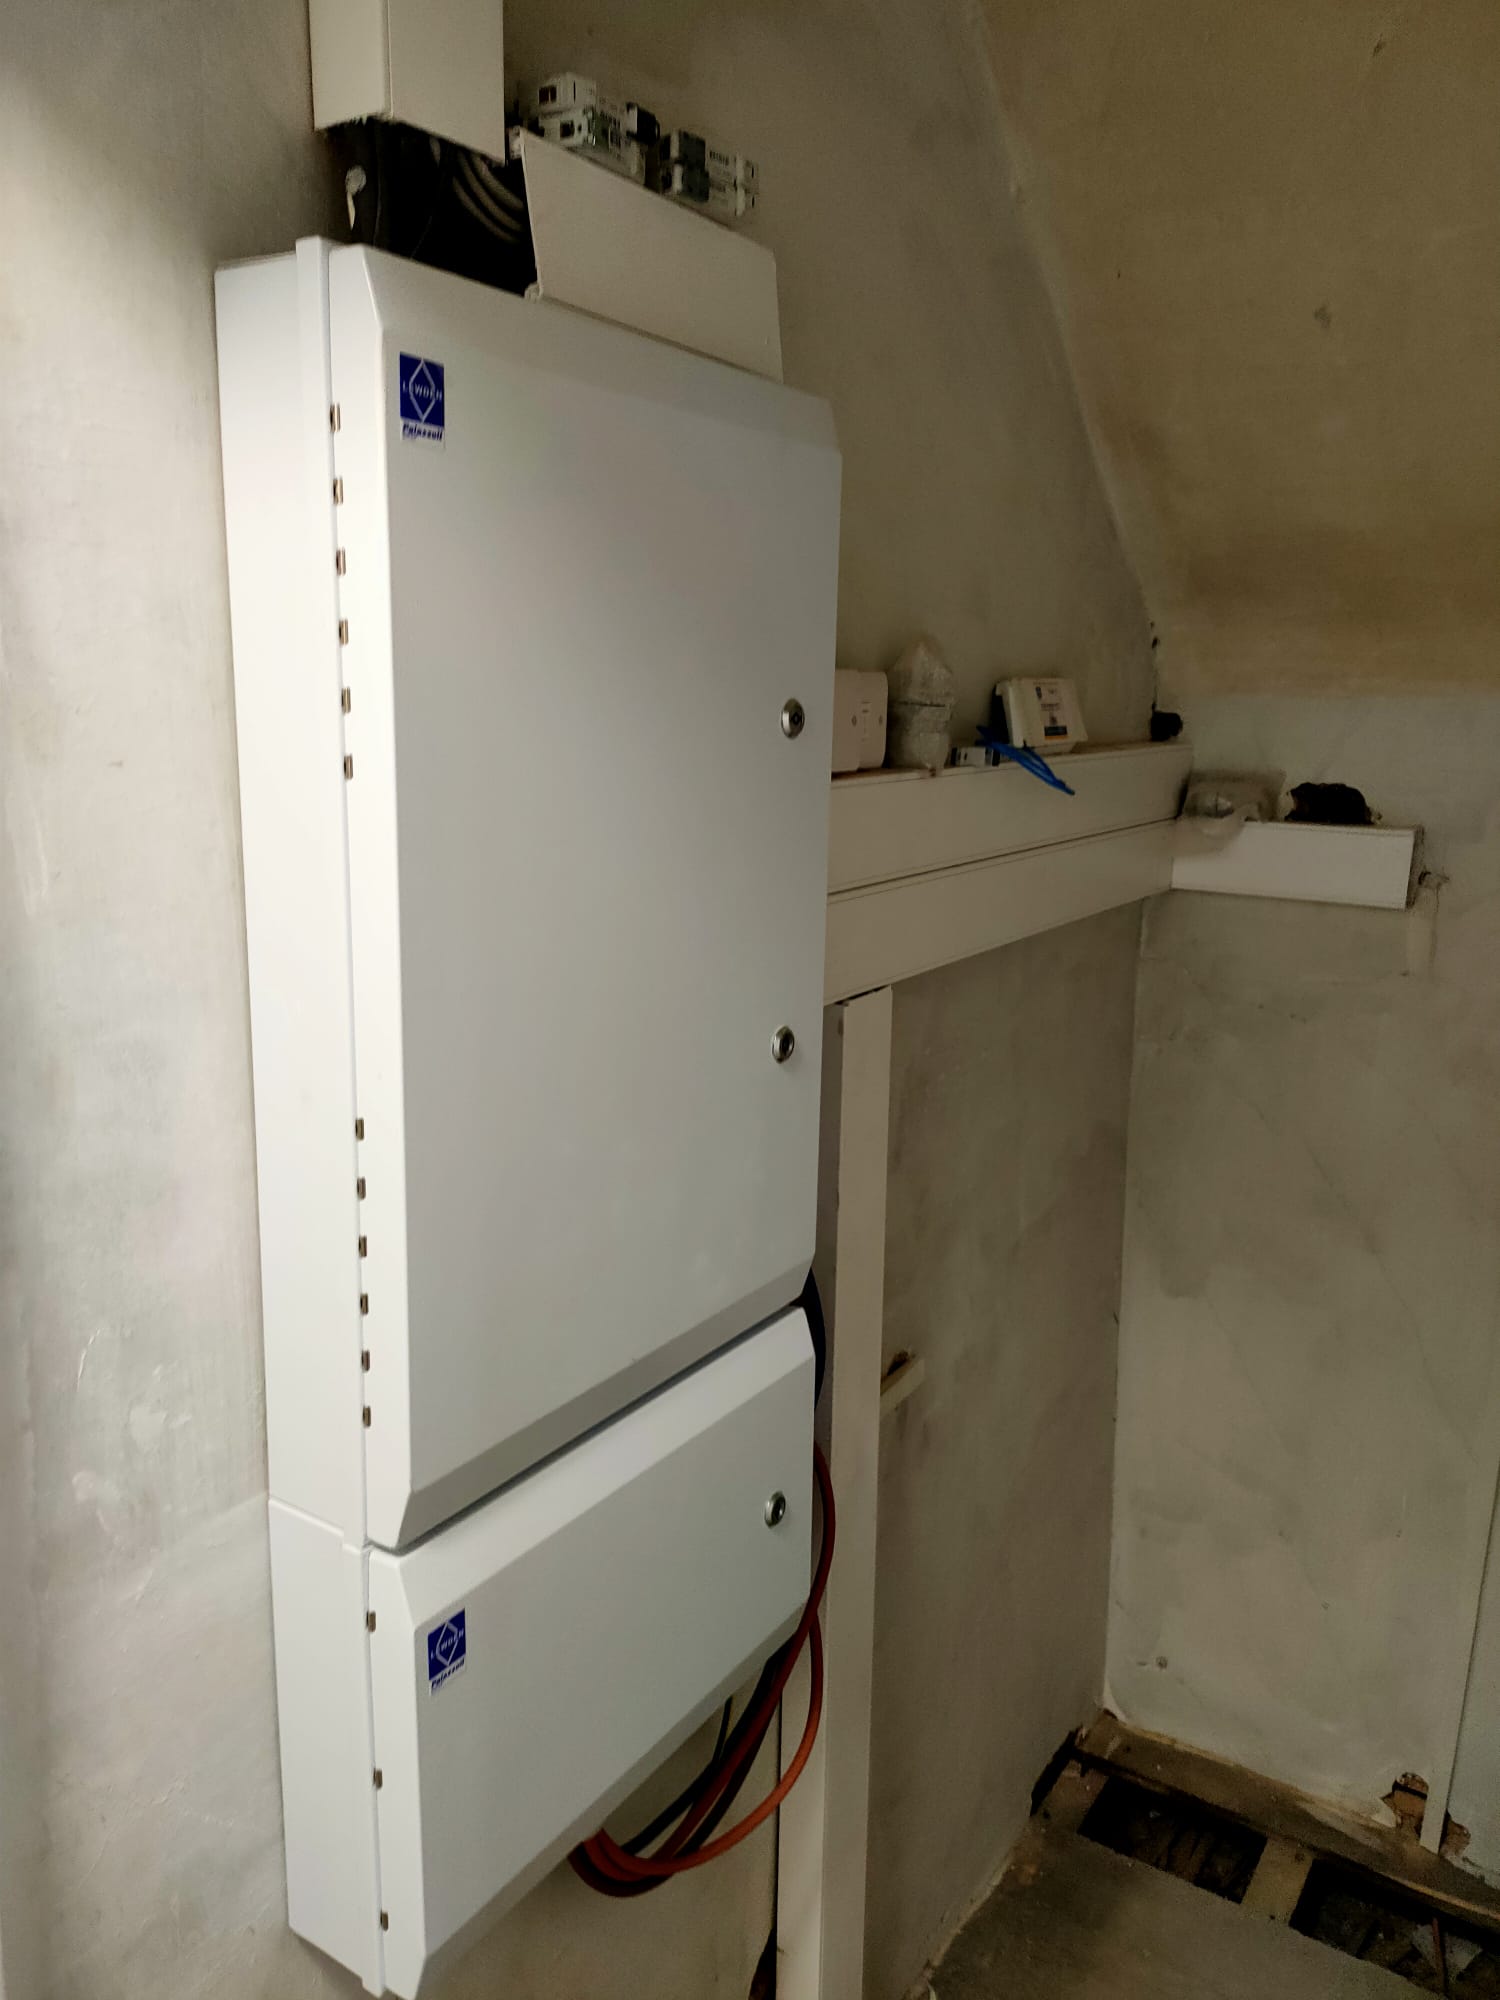 A three phase central unit we installed also in Derby Town